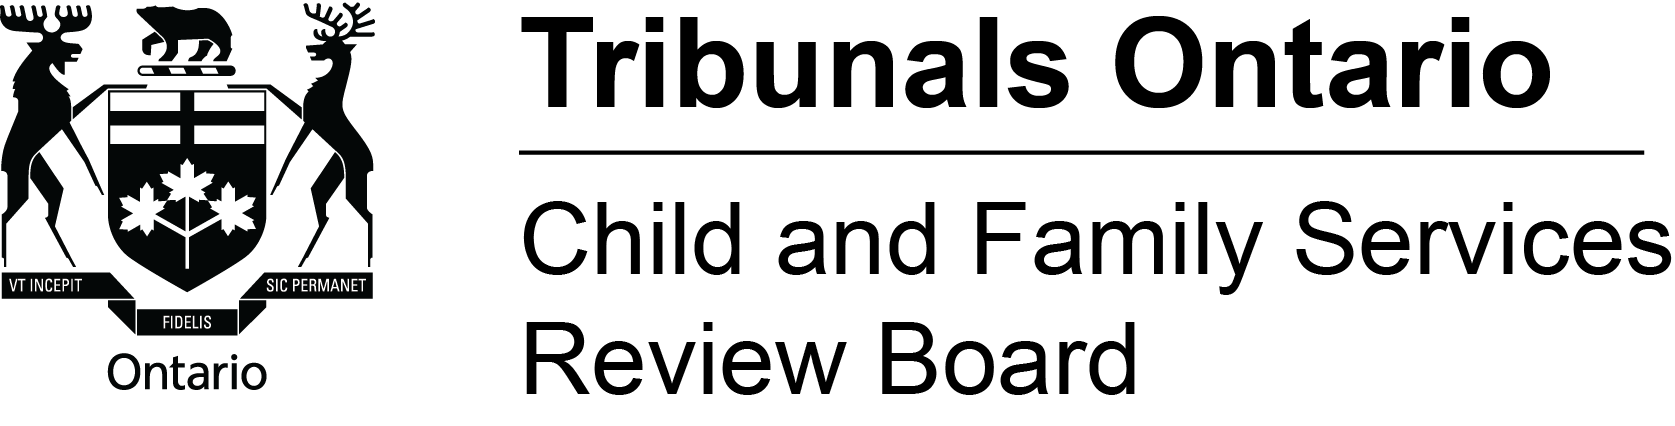 Government of Ontario. Tribunals Ontario. Child and Family Services Review Board logo.